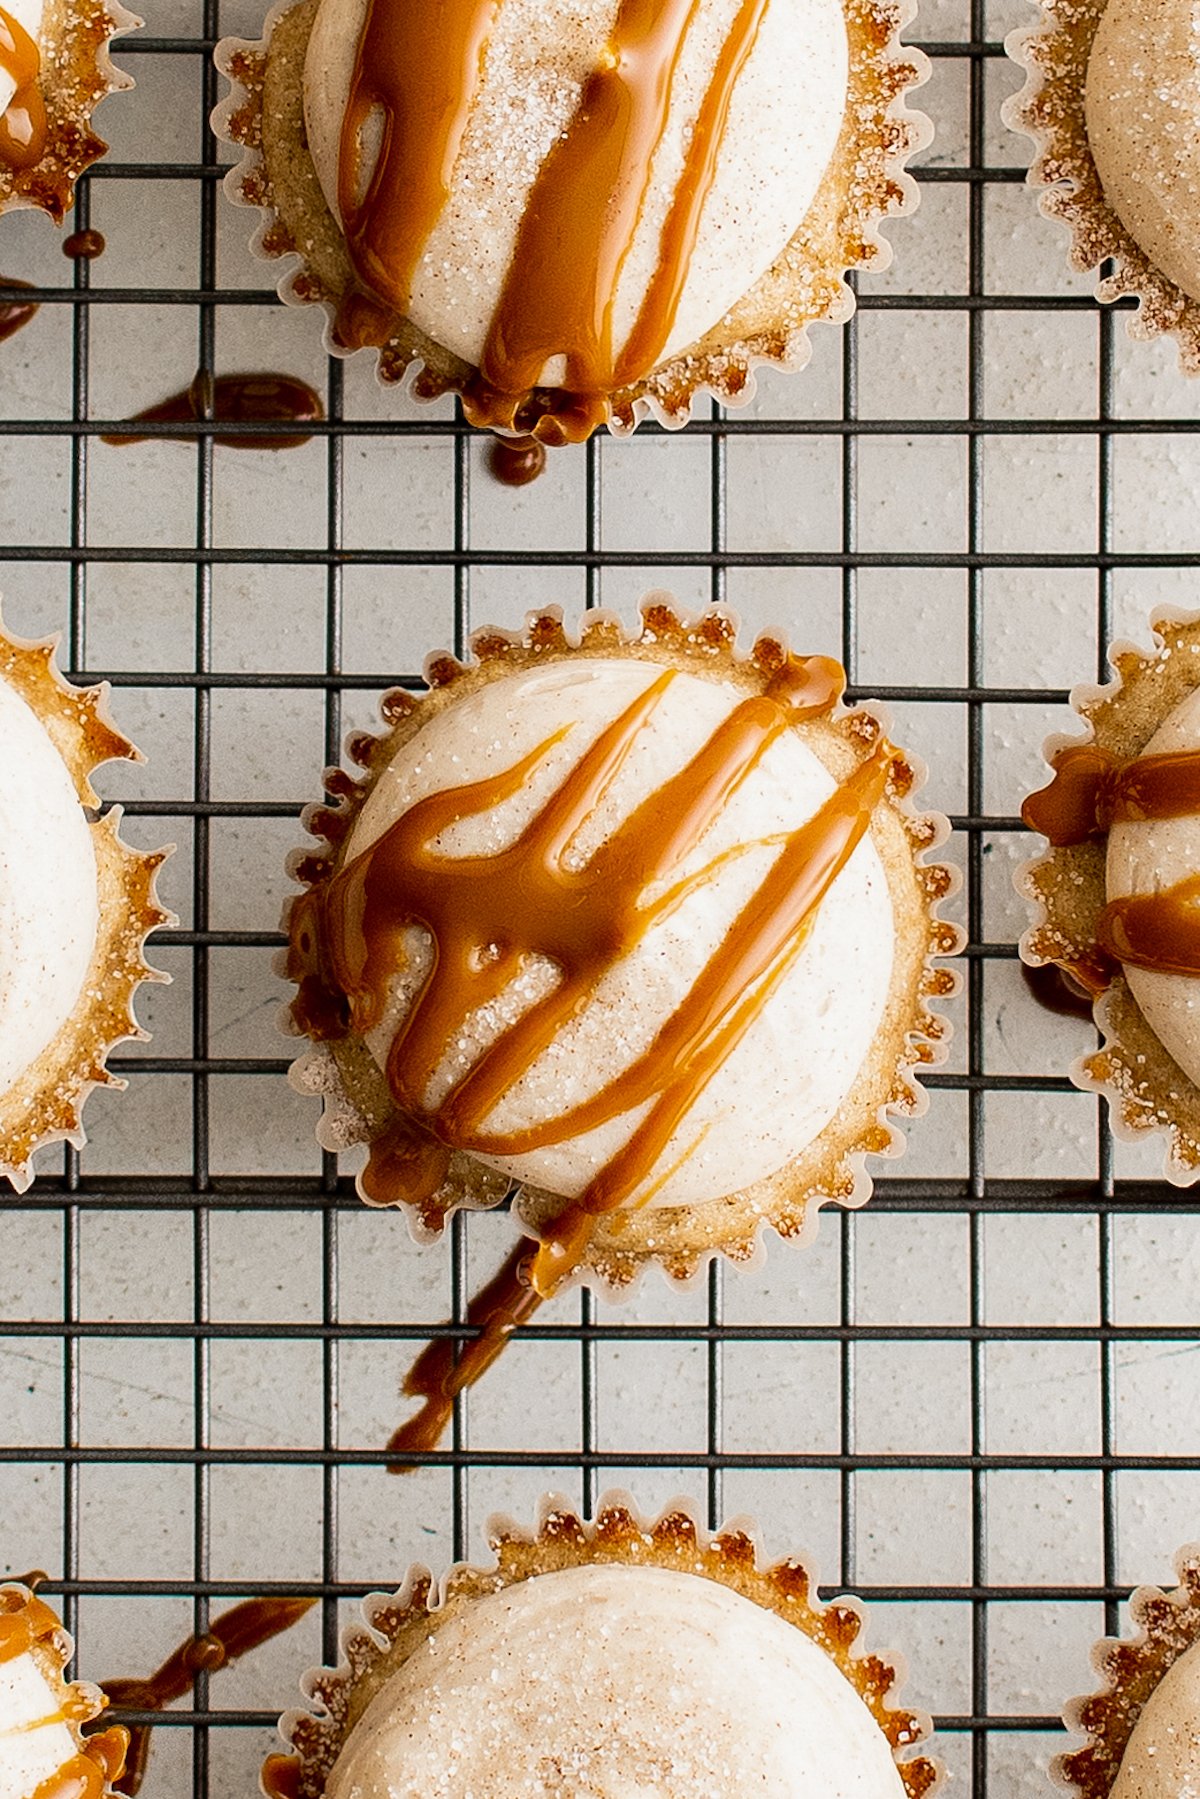 Frosted cupcakes on a cooling rack, drizzled with dulce de leche.